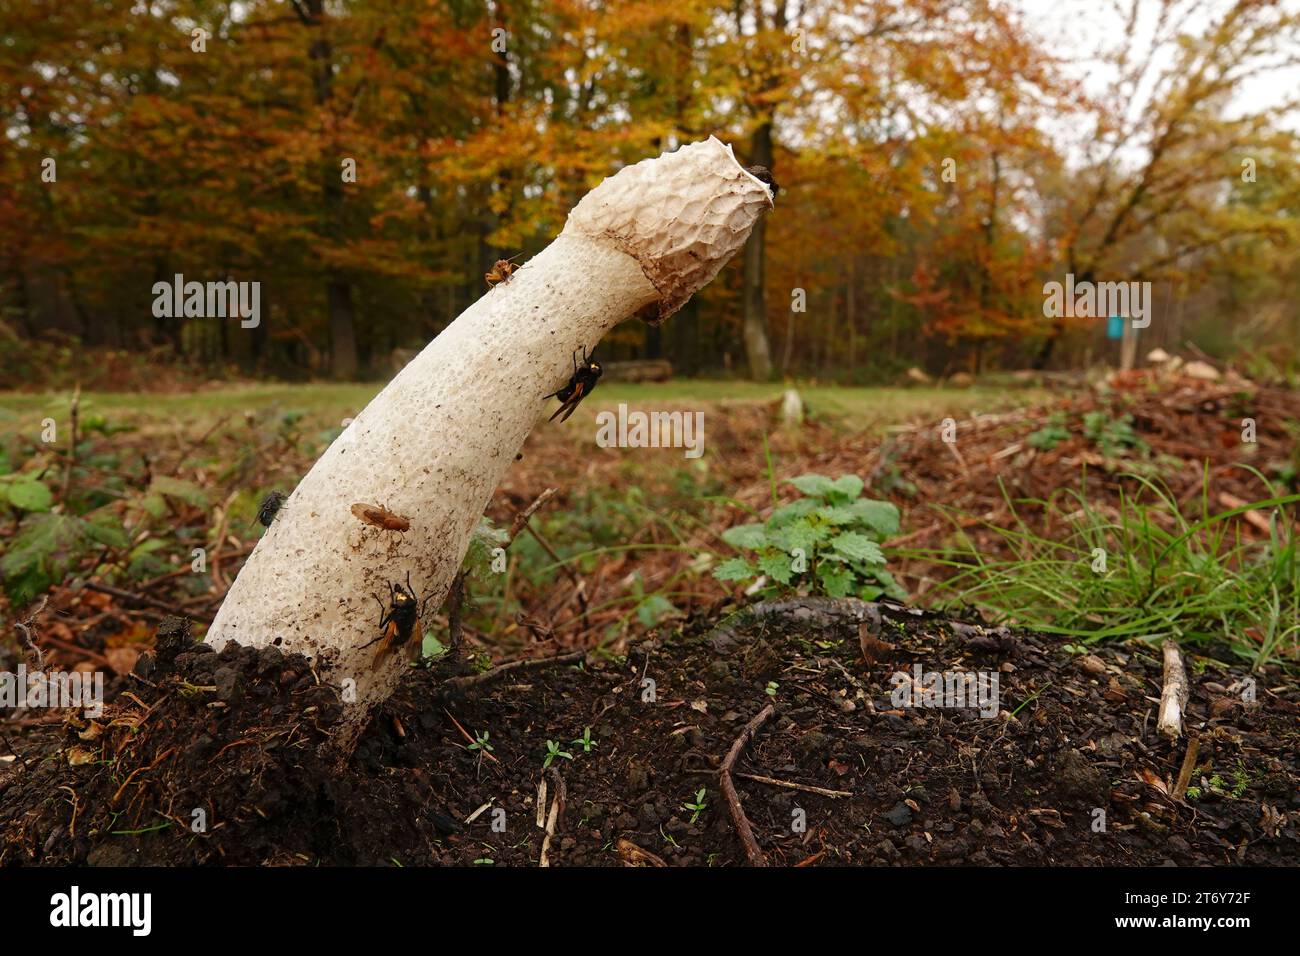 Natural low and wide angle closeup on a Common stinkhorn, Phallus impudicus with several flies on the mushroom Stock Photo